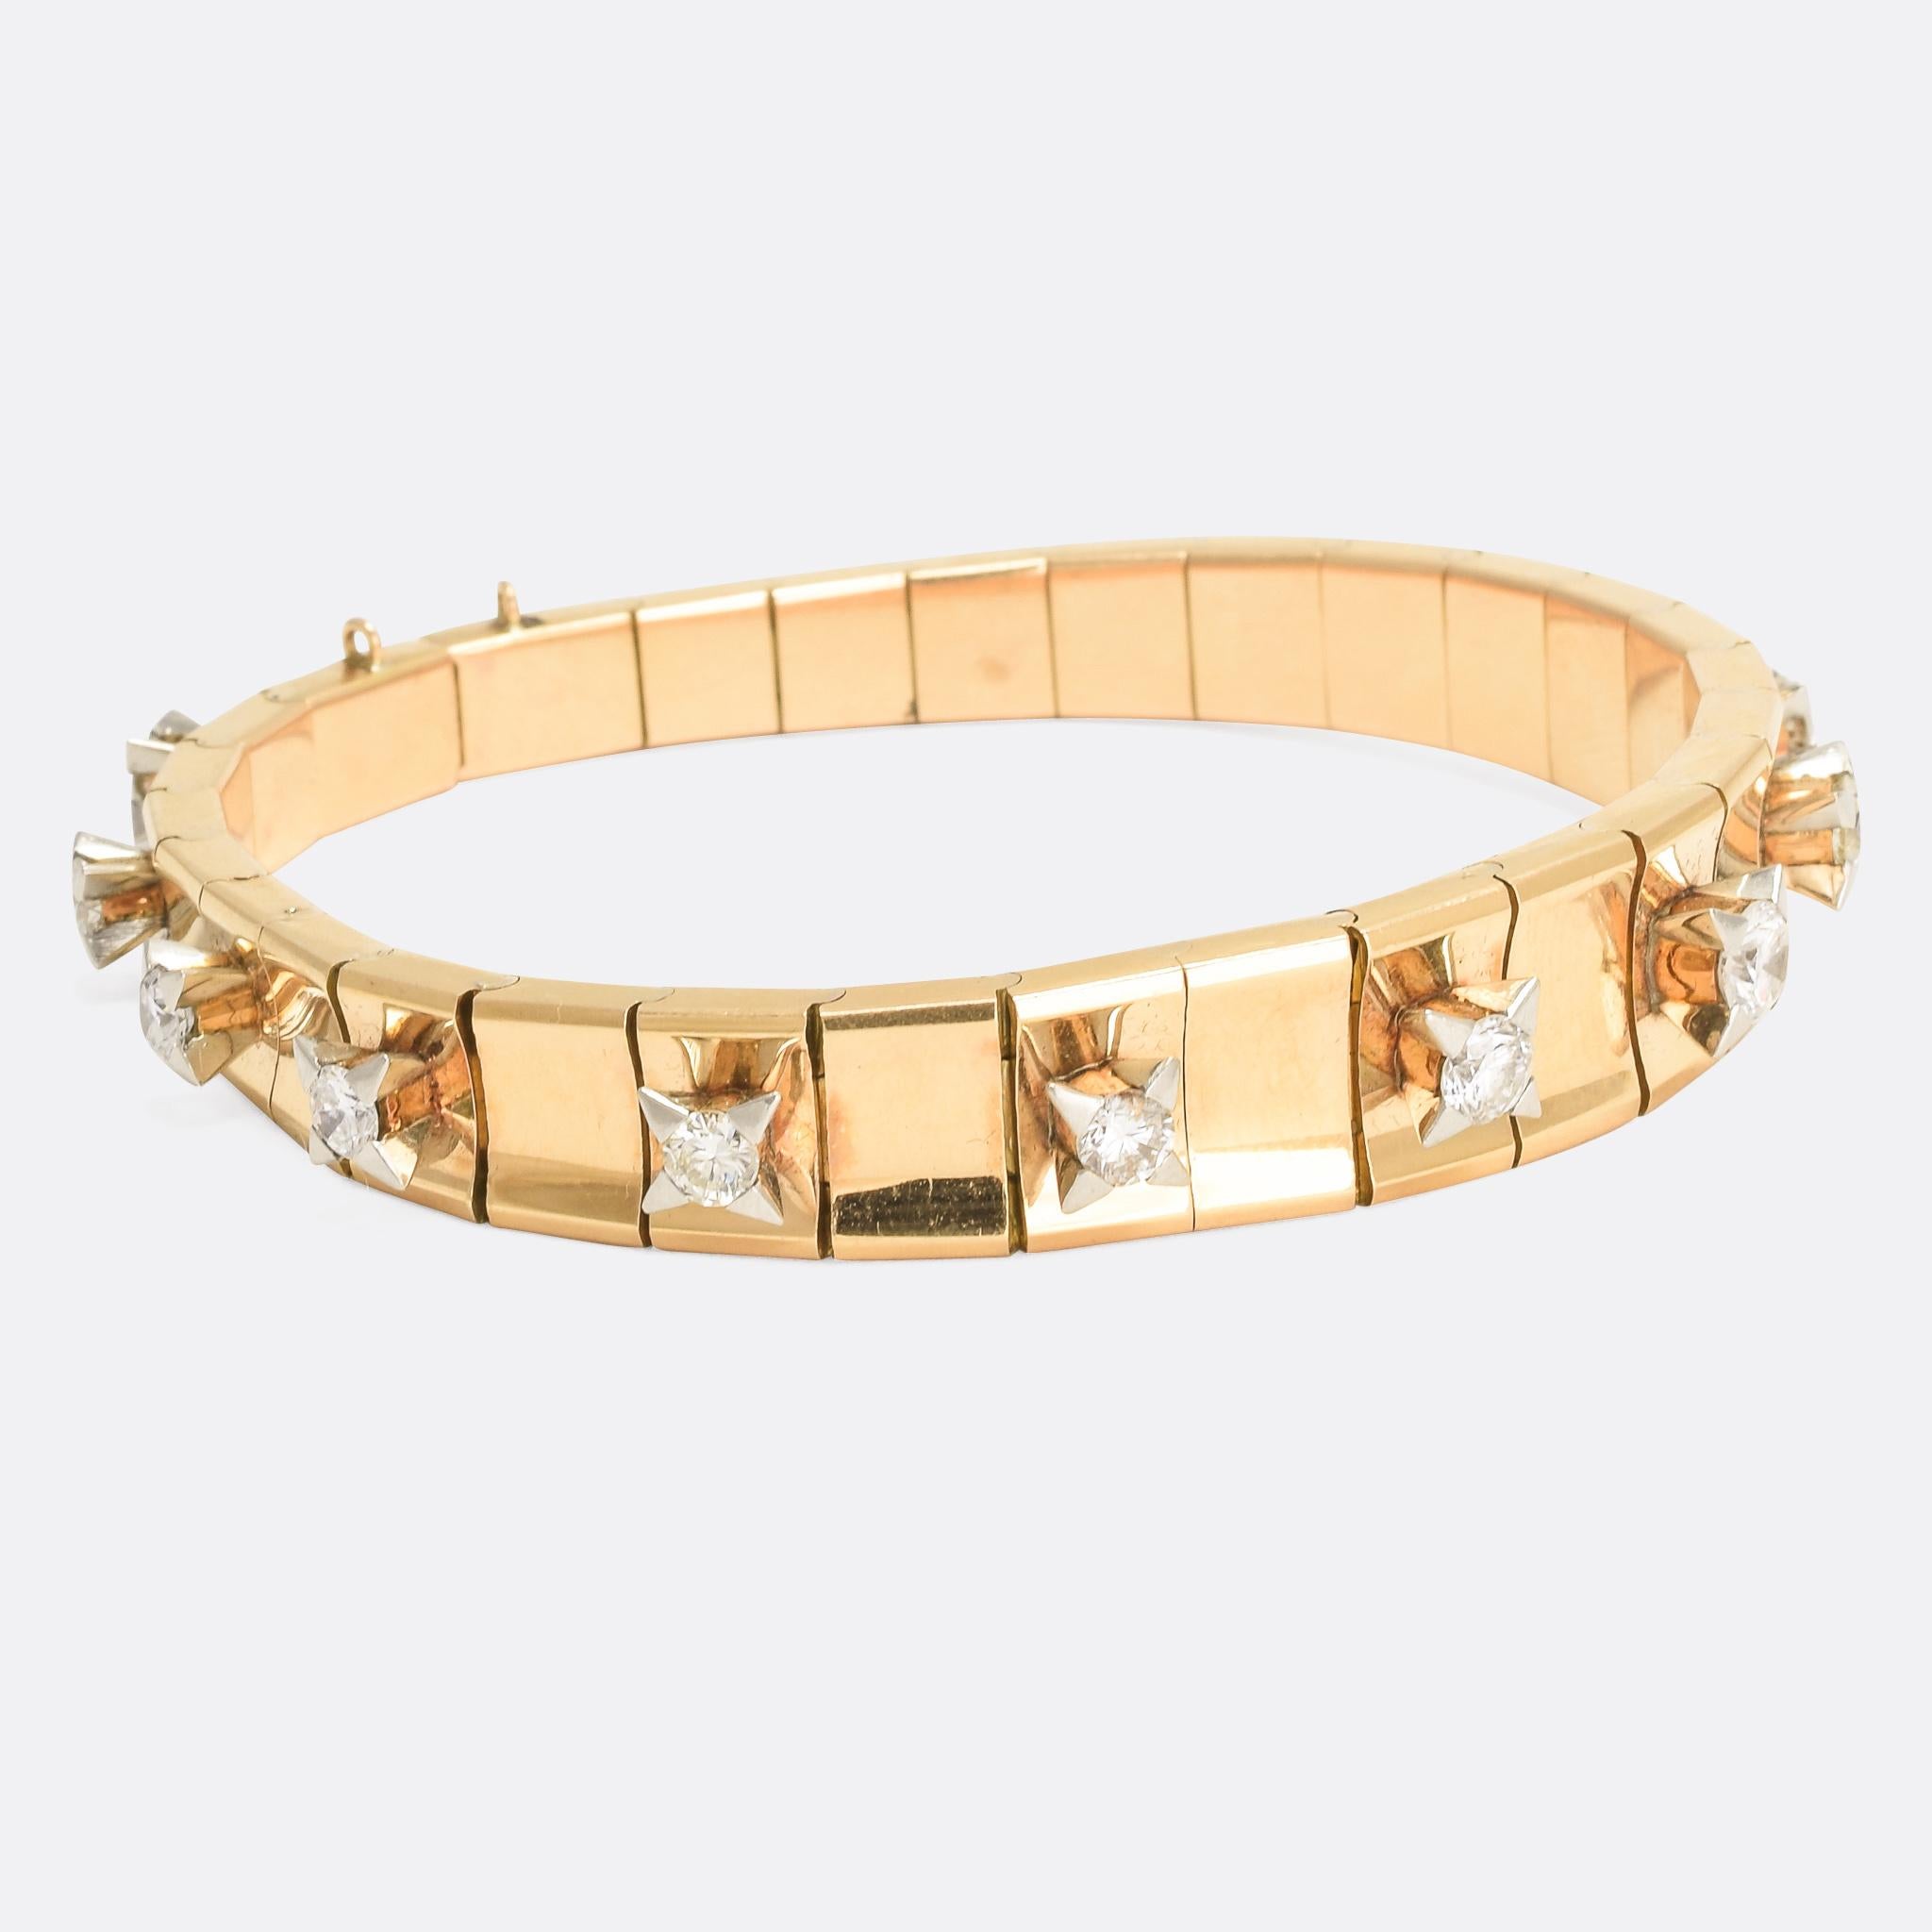 A superb Mid Century Modern diamond bracelet dating from the 1950s. It's exceptionally well made with chunky rose gold links - every other one set with a brilliant cut diamond. It's a stunning statement piece: a striking design and a substantial